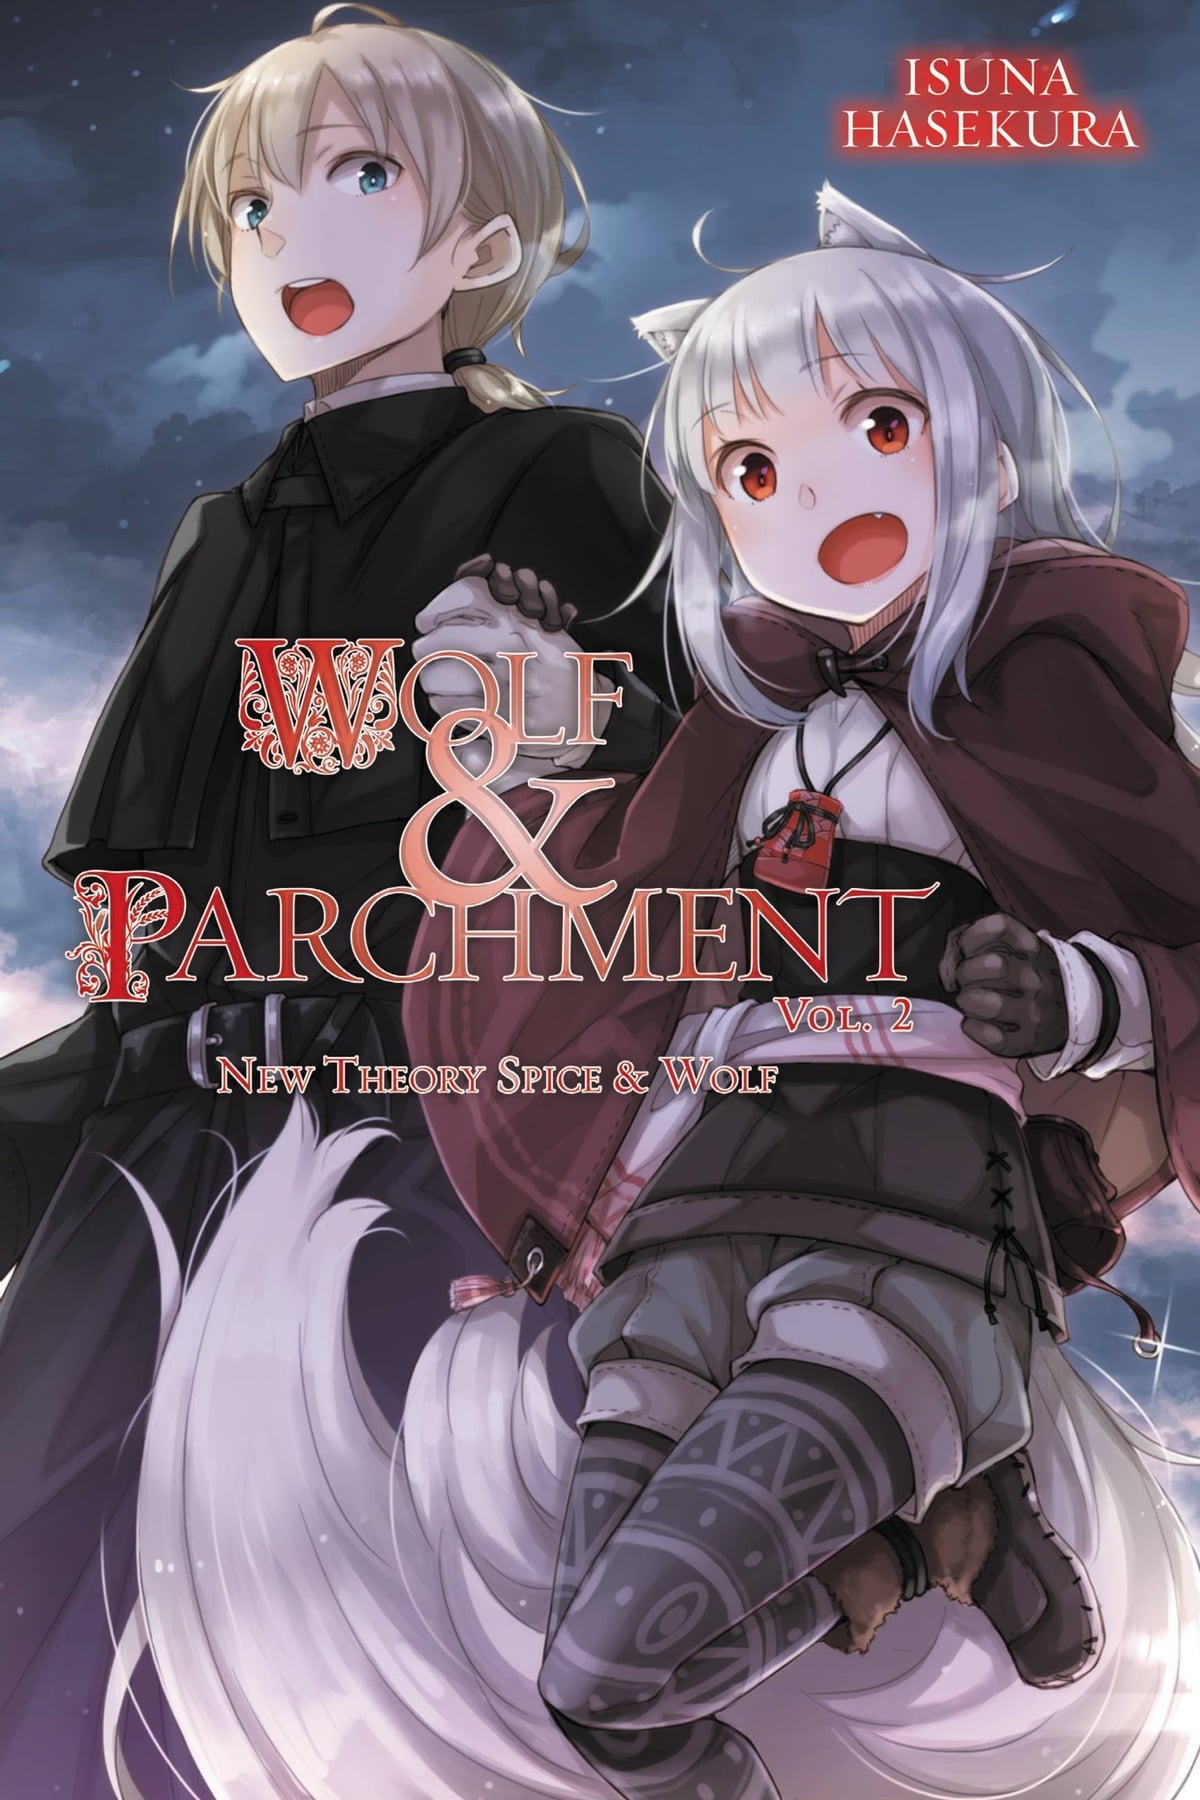 Wolf & Parchment: New Theory Spice & Wolf Vol. 02 (Light Novel)